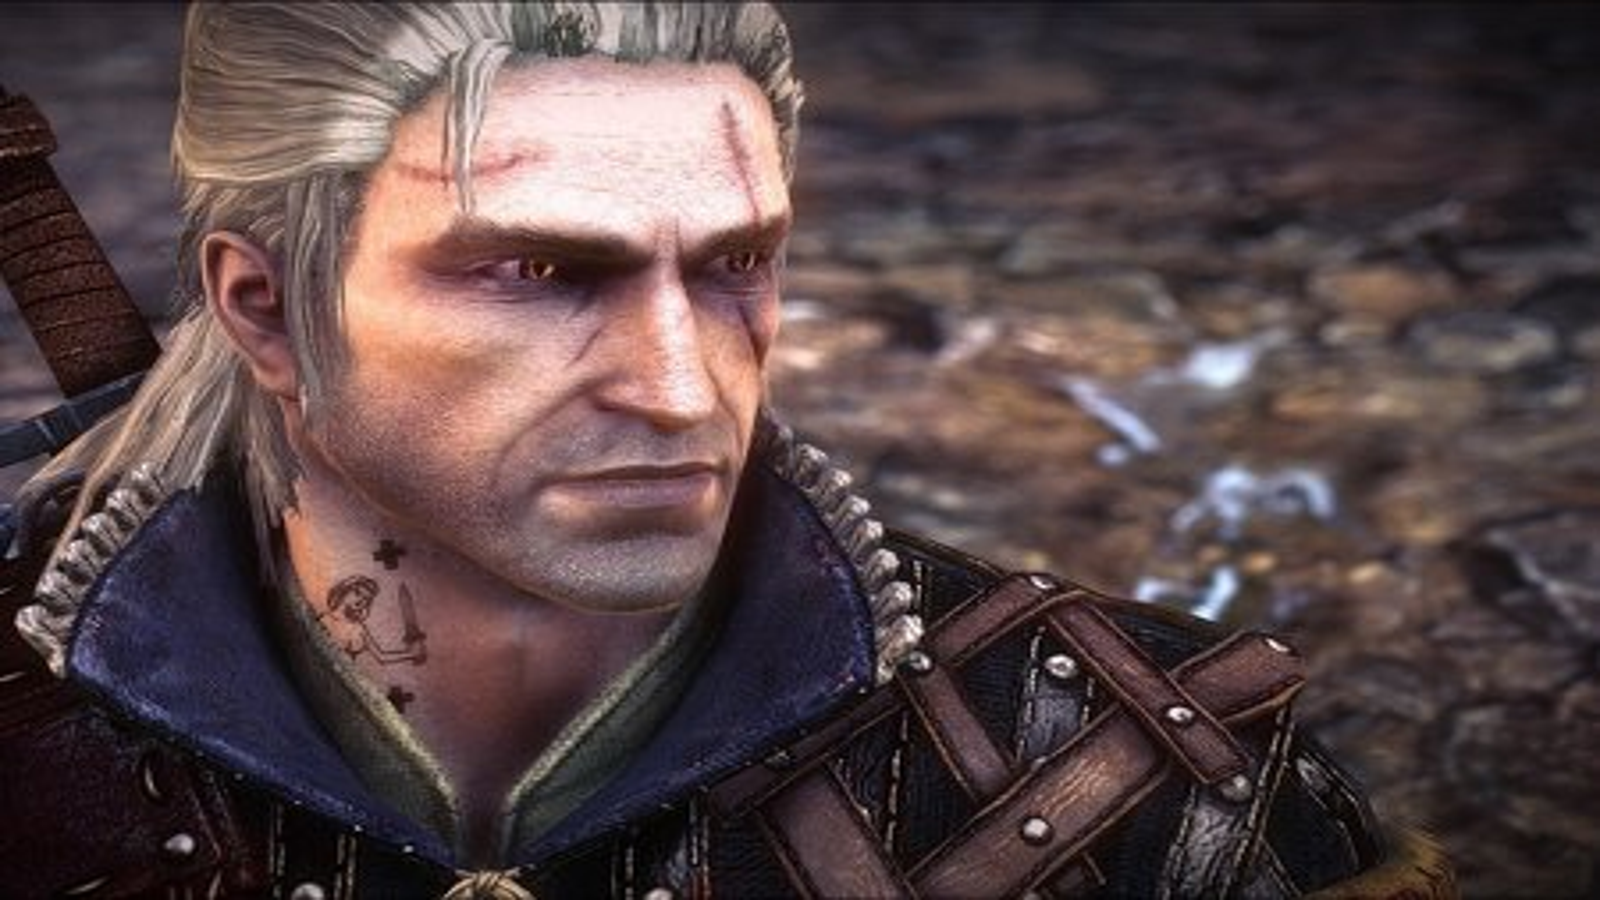 Good Game Stories - The Witcher 2: Assassins of Kings